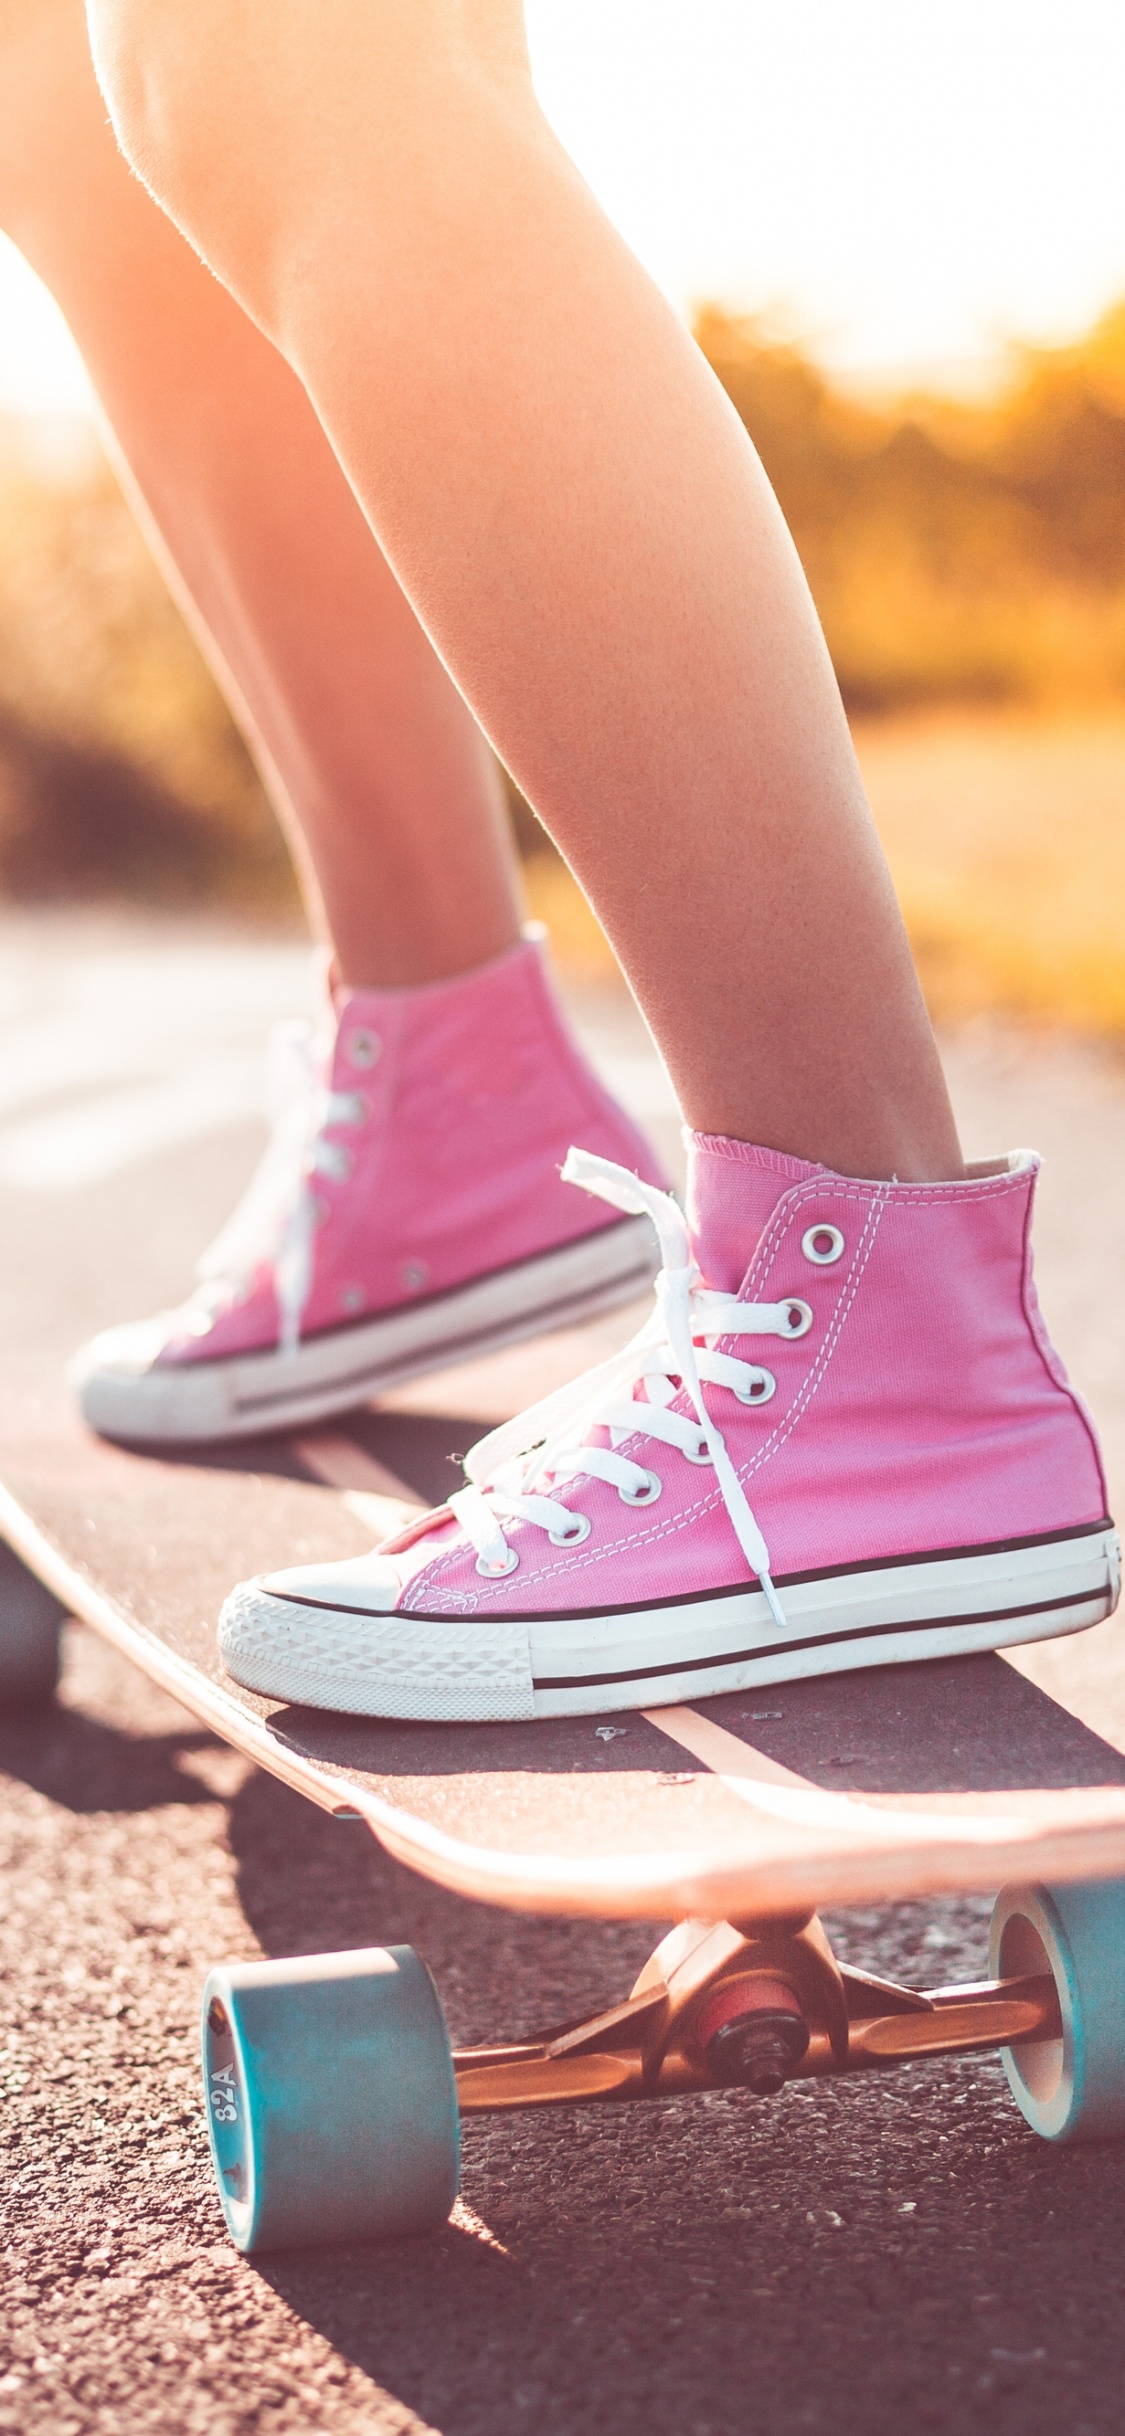 Person in Pink and White Nike Sneakers and Pink Nike Sneakers. Wallpaper in 1125x2436 Resolution